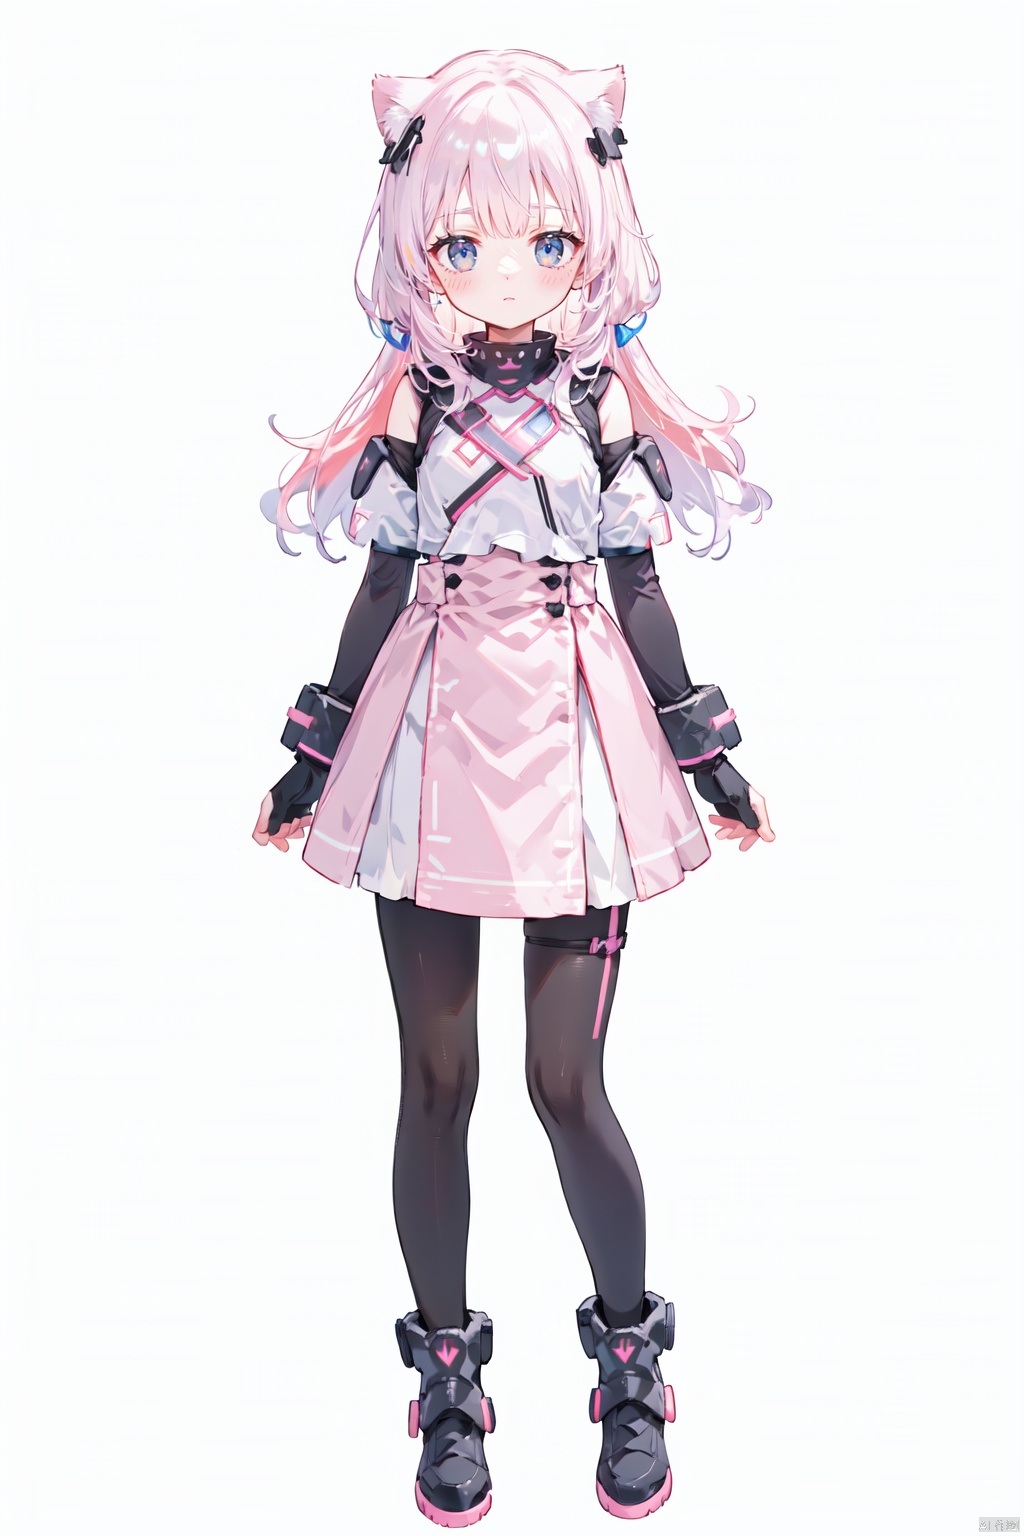 (((white background))),((poakl)),full-body character, nikke game reference, striking stance, highly stylized, form-fitting exo-suit, revealing cutout armor, asymmetrical breastplate, mini-skirt, leggings with knee pads, chunky heeled boots, sniper rifle, pink hair highlights, battle-ready goggles pushed up on forehead, cat ears headset, silver and pink color scheme, armored gauntlets, waist cincher, floating shoulder plates, dual pistols holstered, energy blade, confident smirk, lens flares, hi-tech environment, LED accents on suit, windblown hair effect, smoke trail from barrel, dramatic backlighting